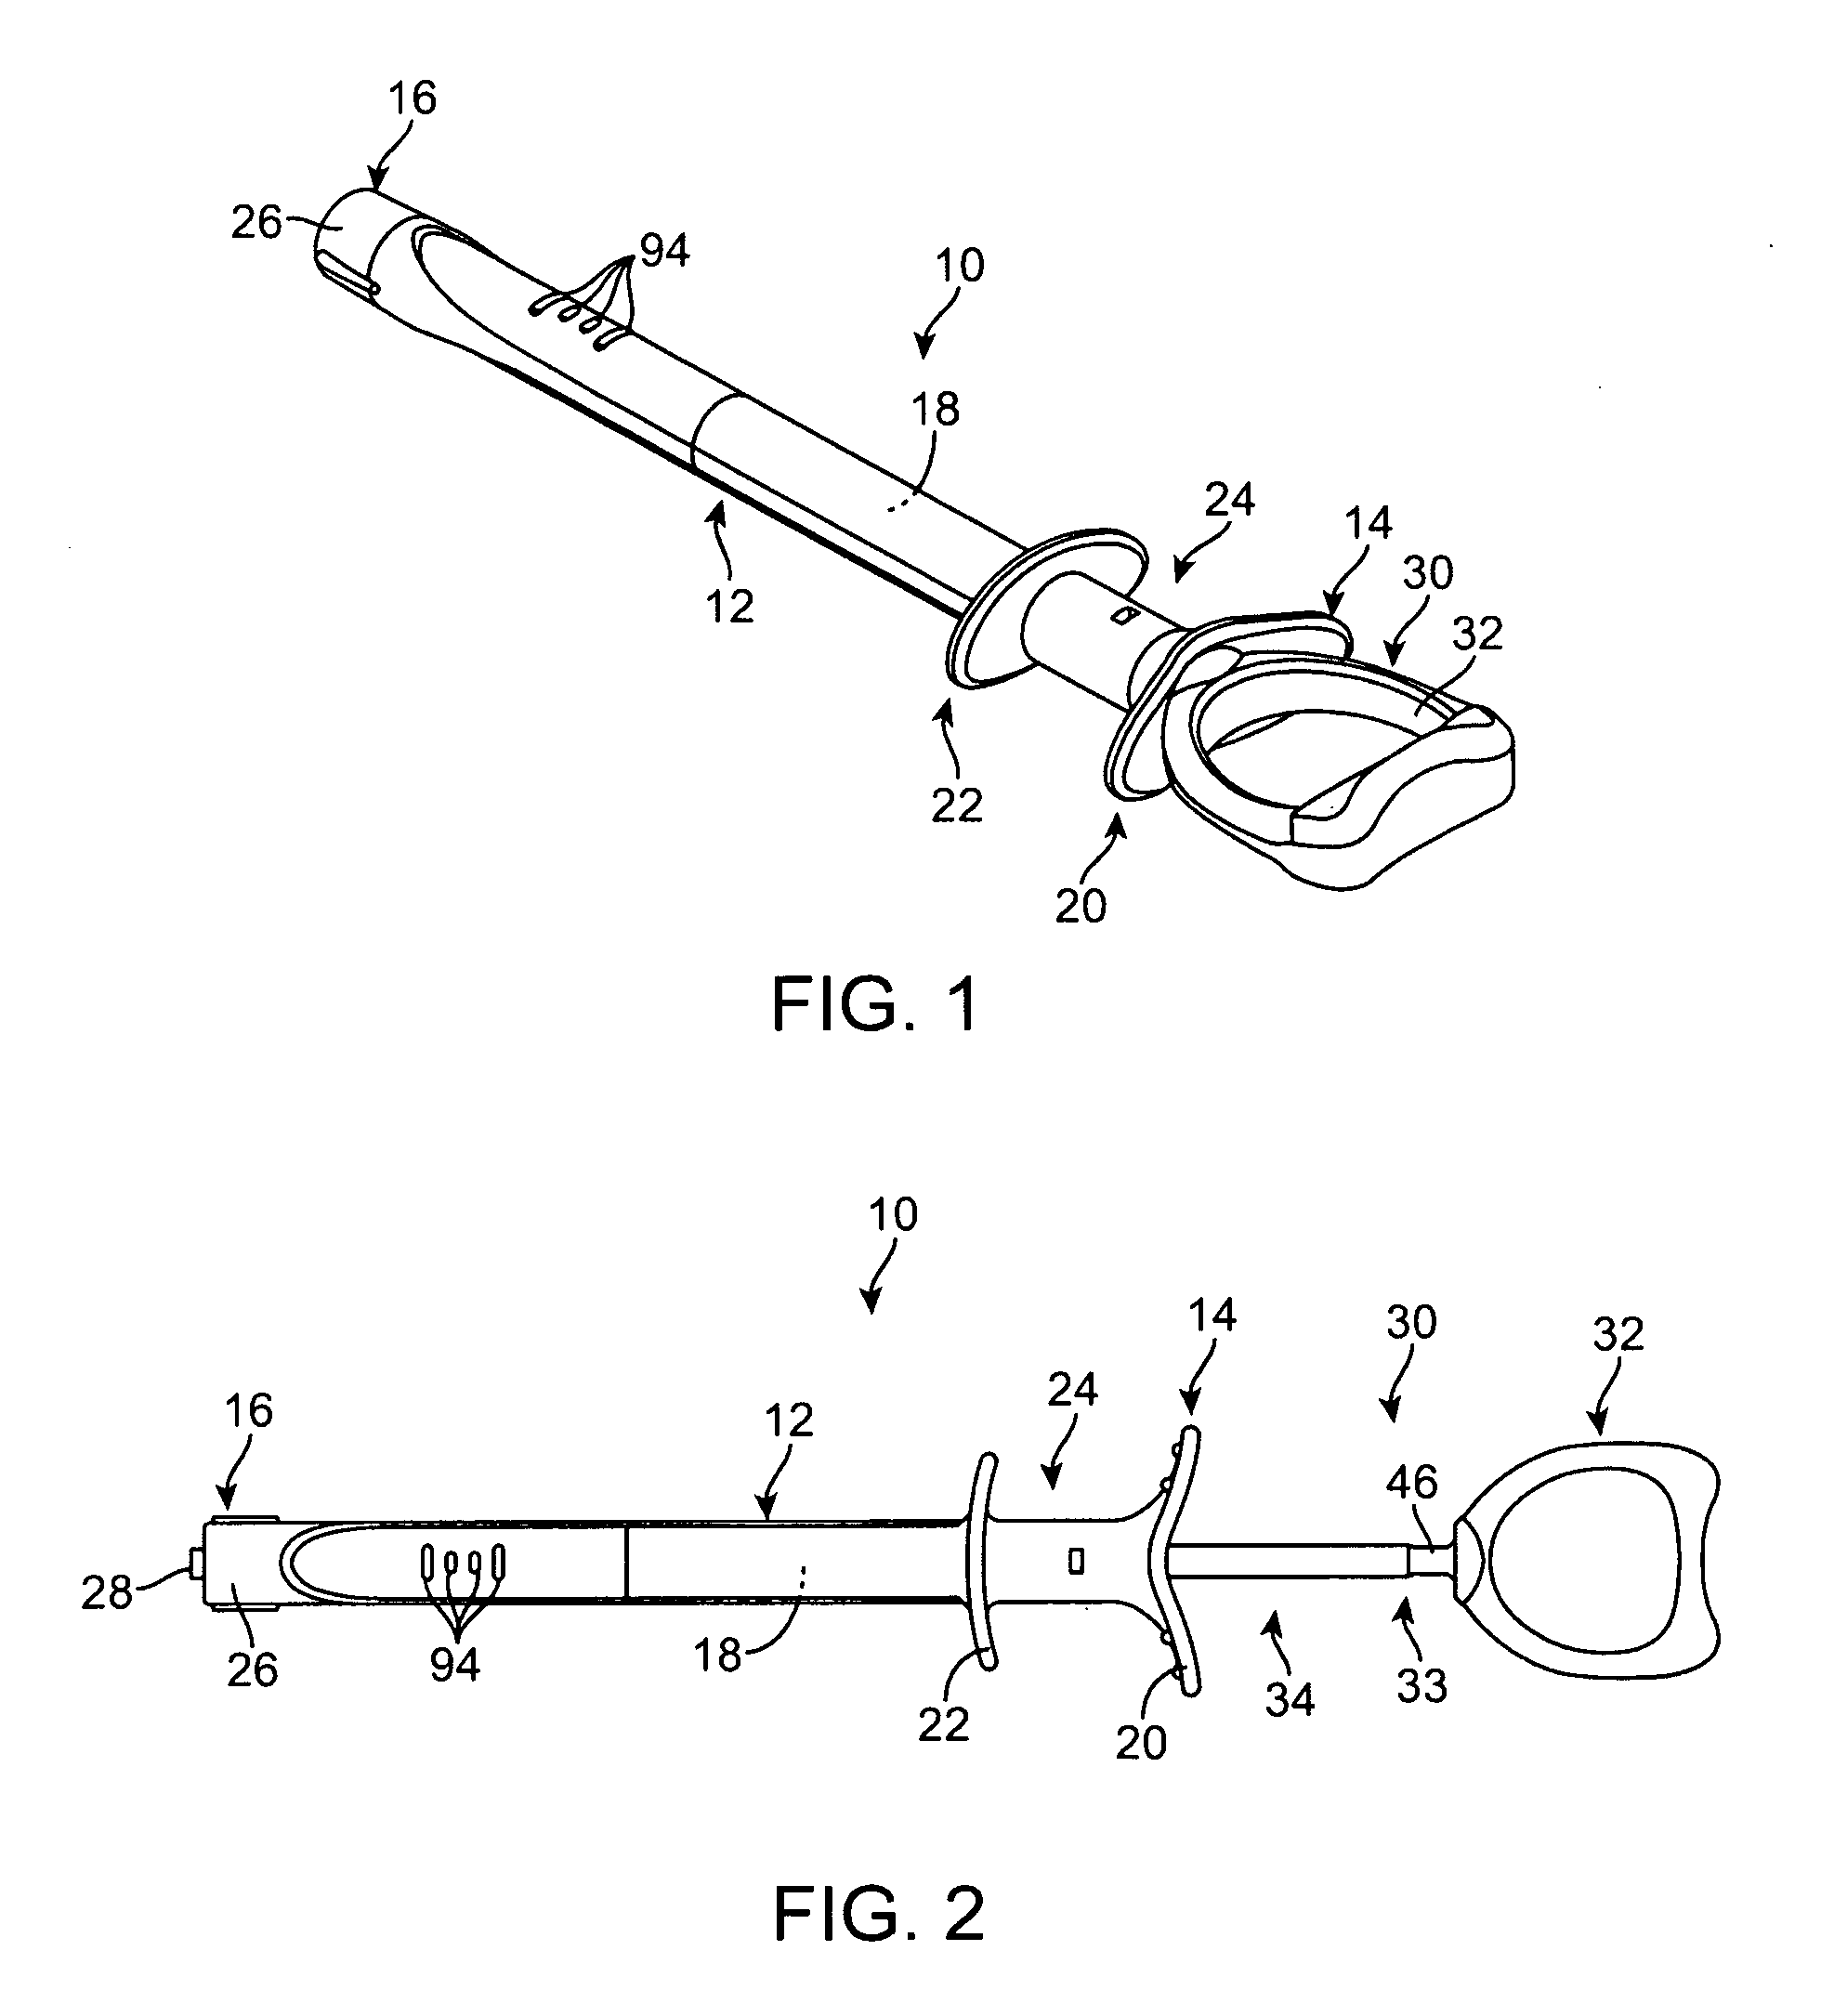 Balloon catheter inflation apparatus and methods